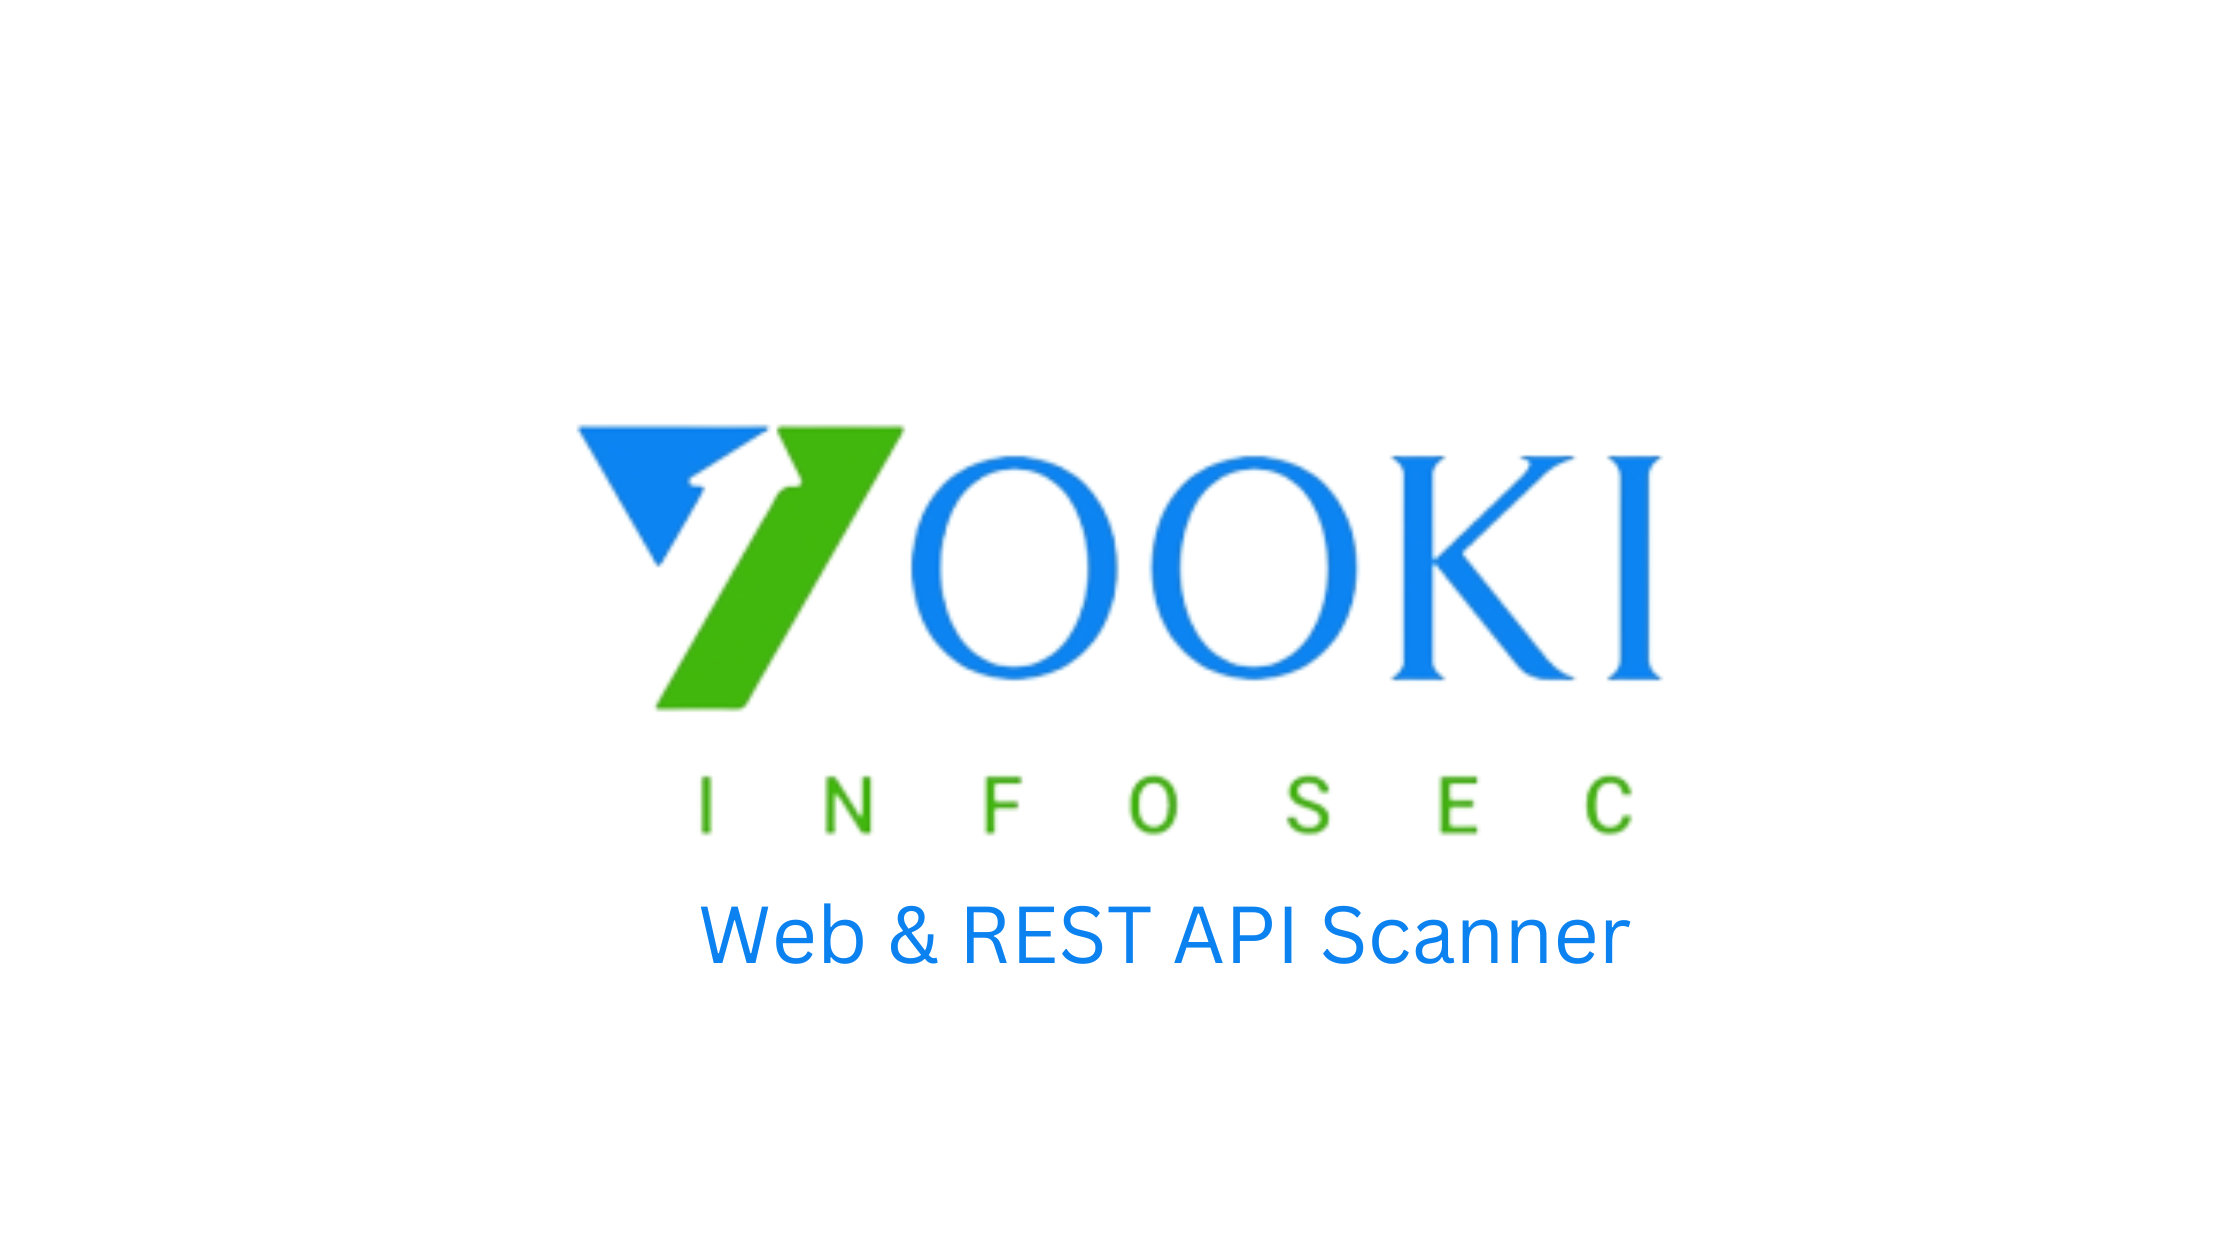 Logo of Vooki Infosec featuring the text "Vooki Infosec - Web & REST API Scanner" with a stylized 'V' above the text.